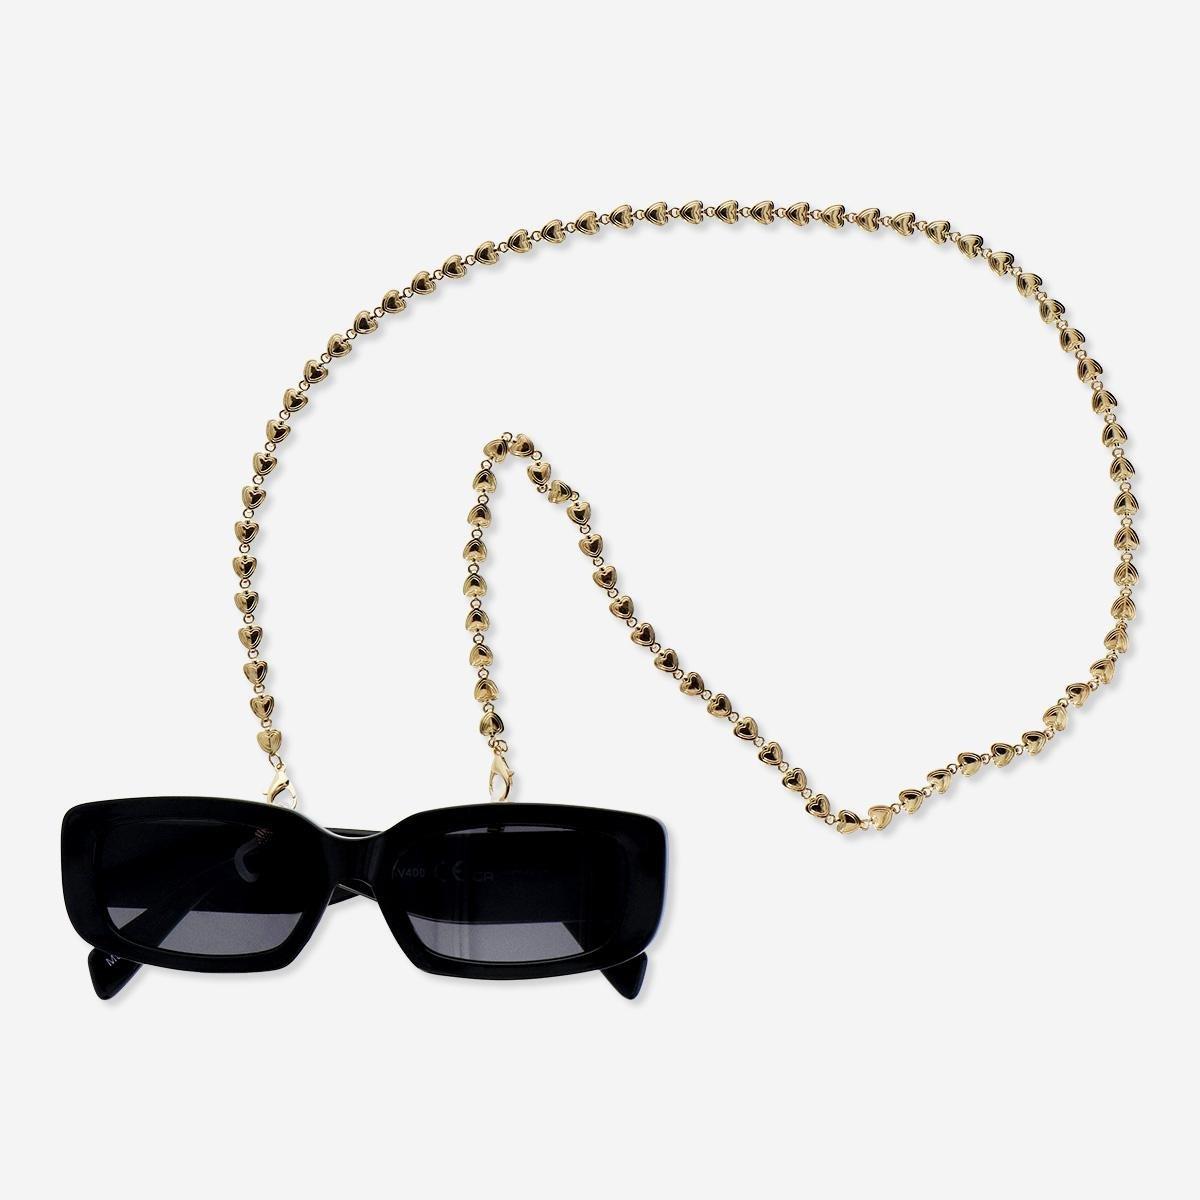 Gold spectacle strap